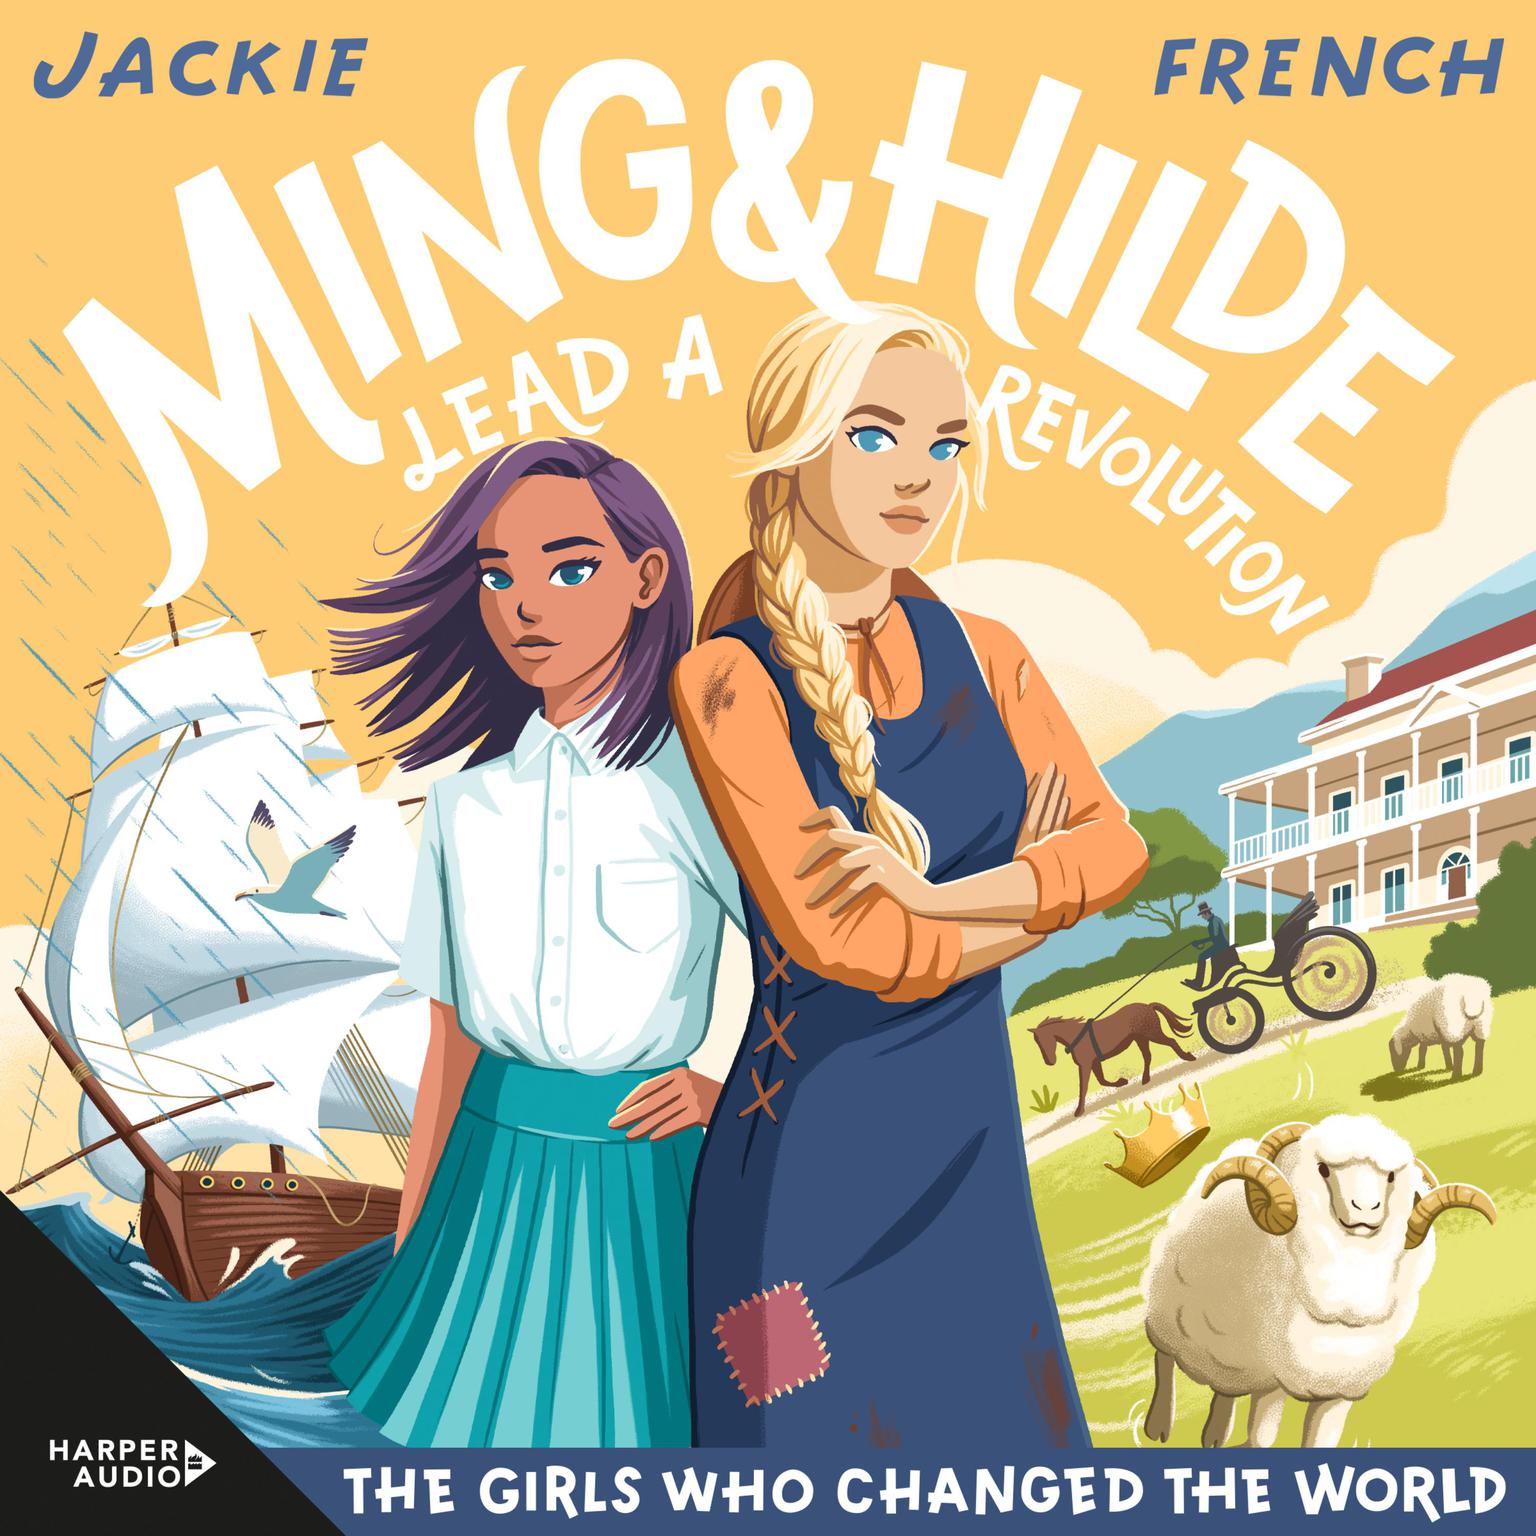 Ming and Hilde Lead a Revolution (The Girls Who Changed the World, #3) Audiobook, by Jackie French